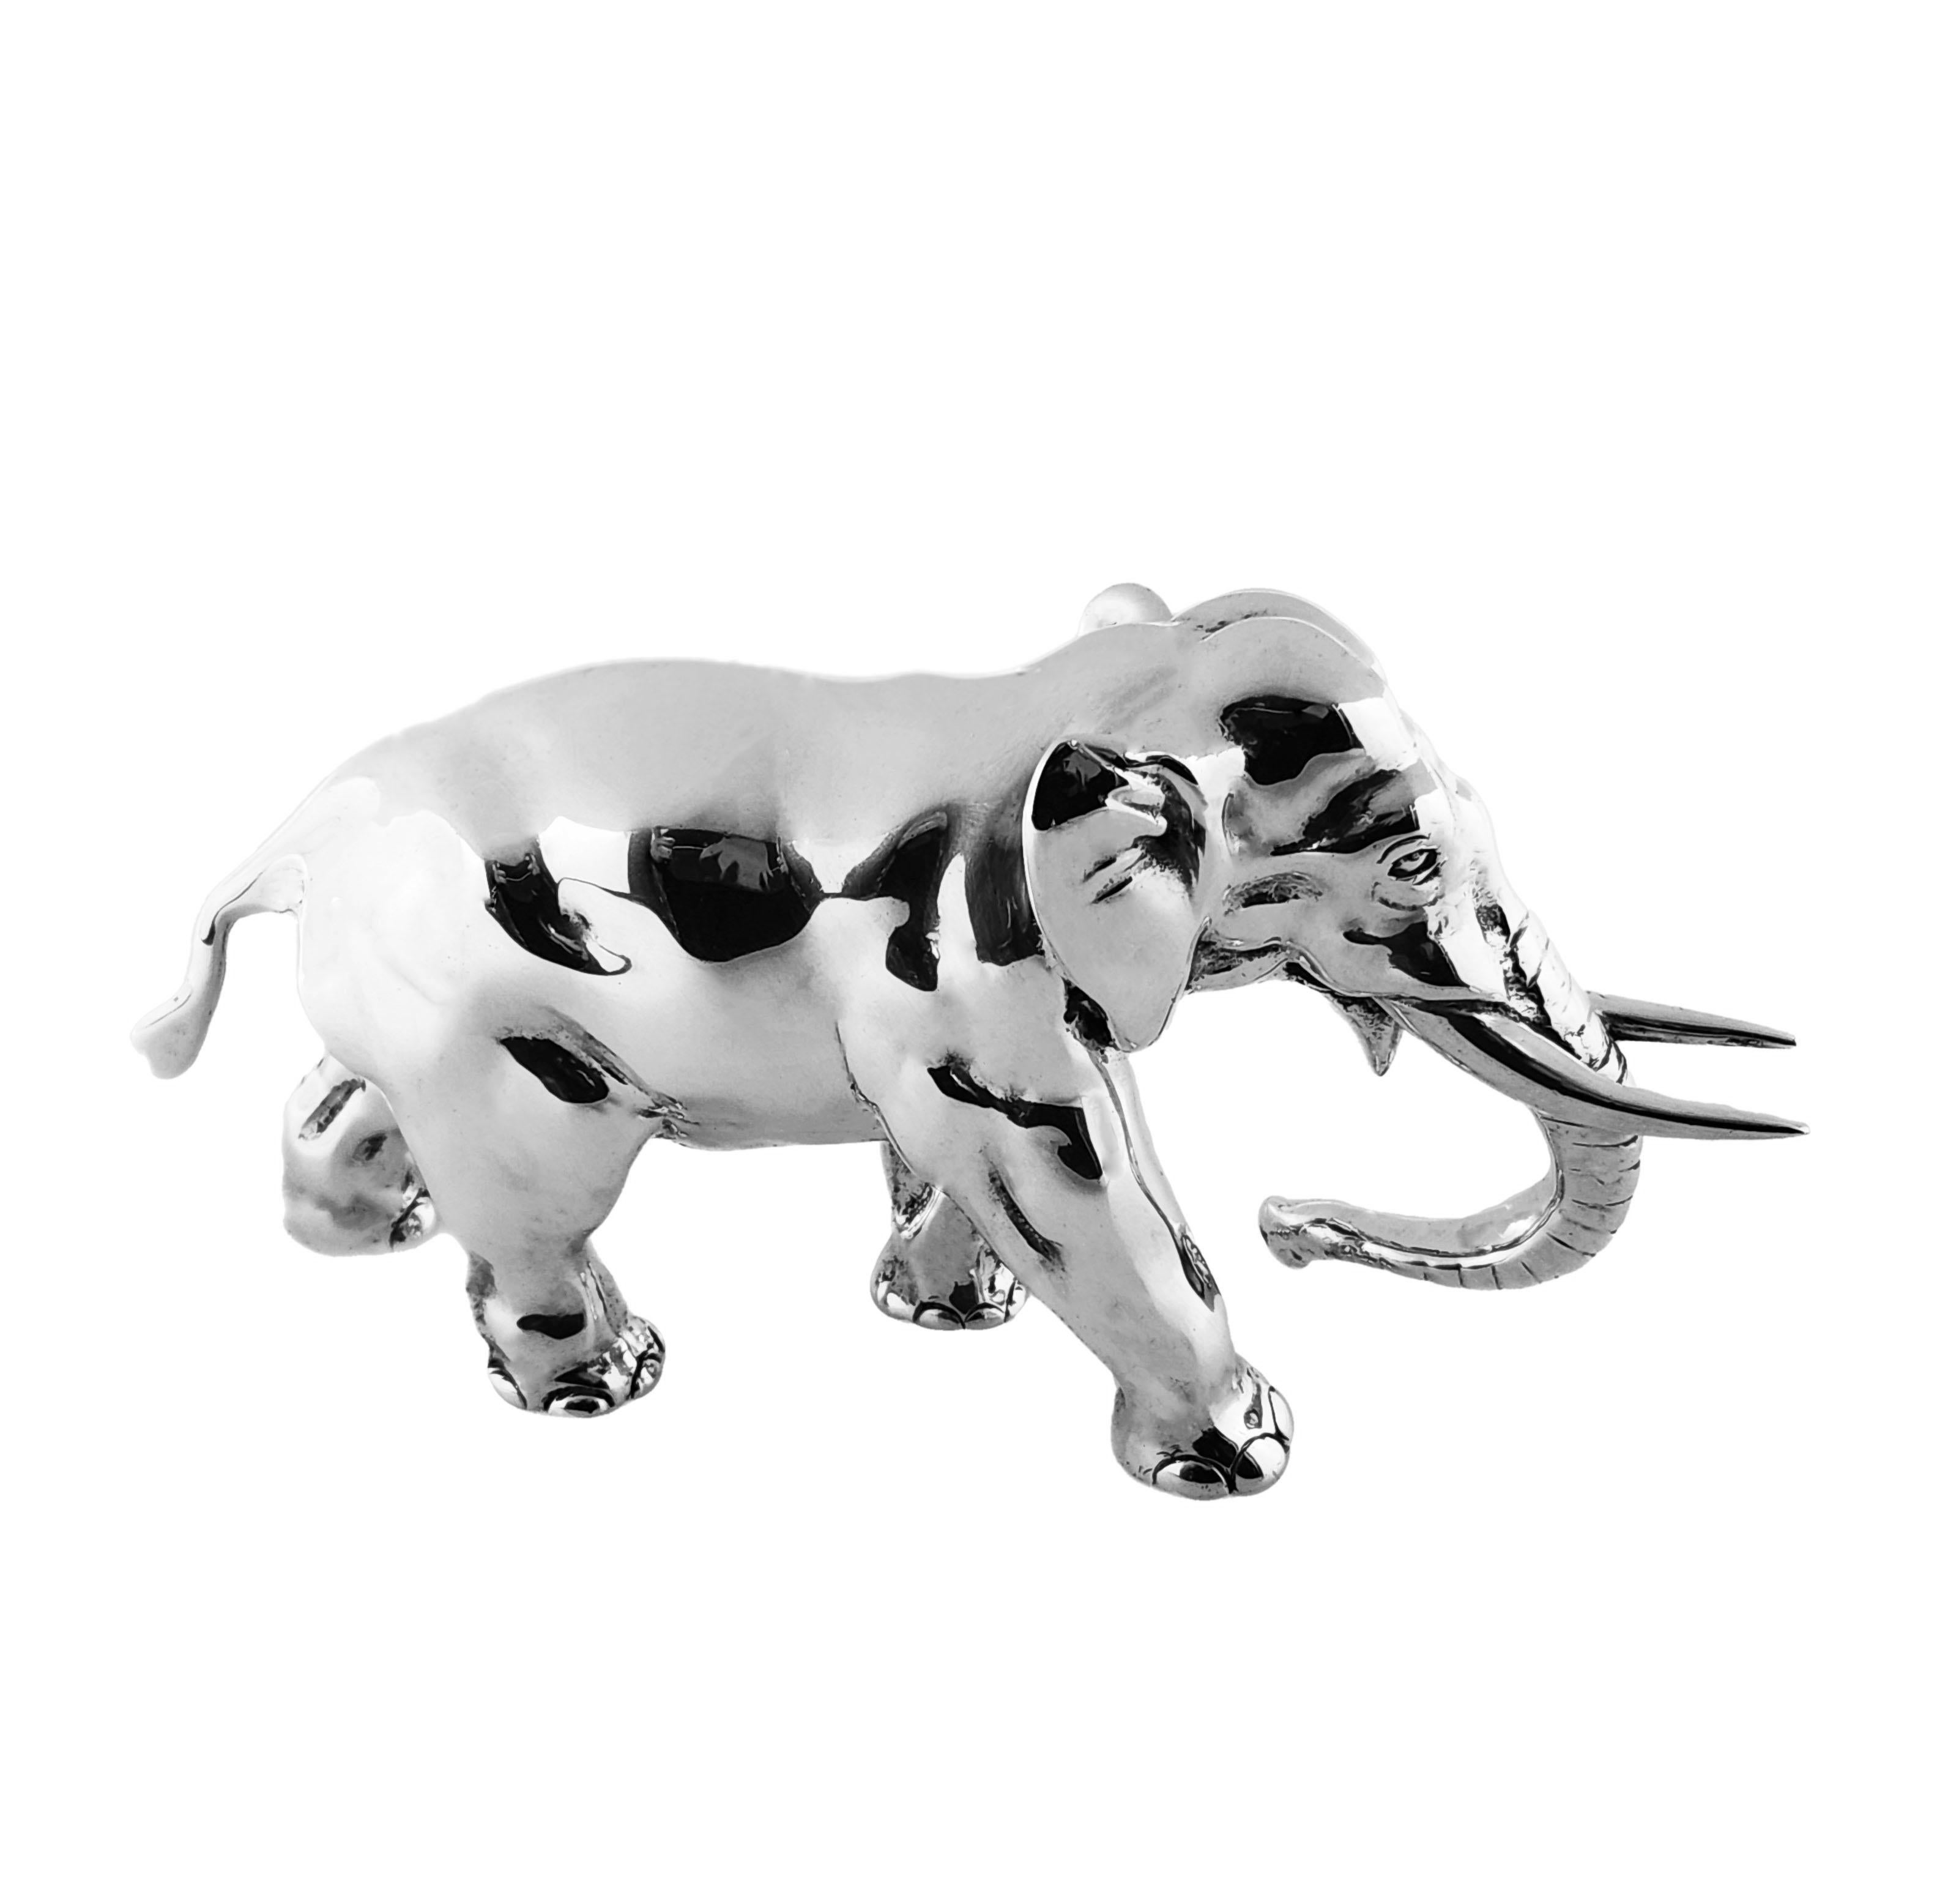 A beautiful Solid Silver Model of an Elephant of exceptionally heavy weight. A carefully crafted model with a great attention to detail, this Model Elephant of of a notably heavy weight and size suitable for use as a paperweight. The Elephant has a